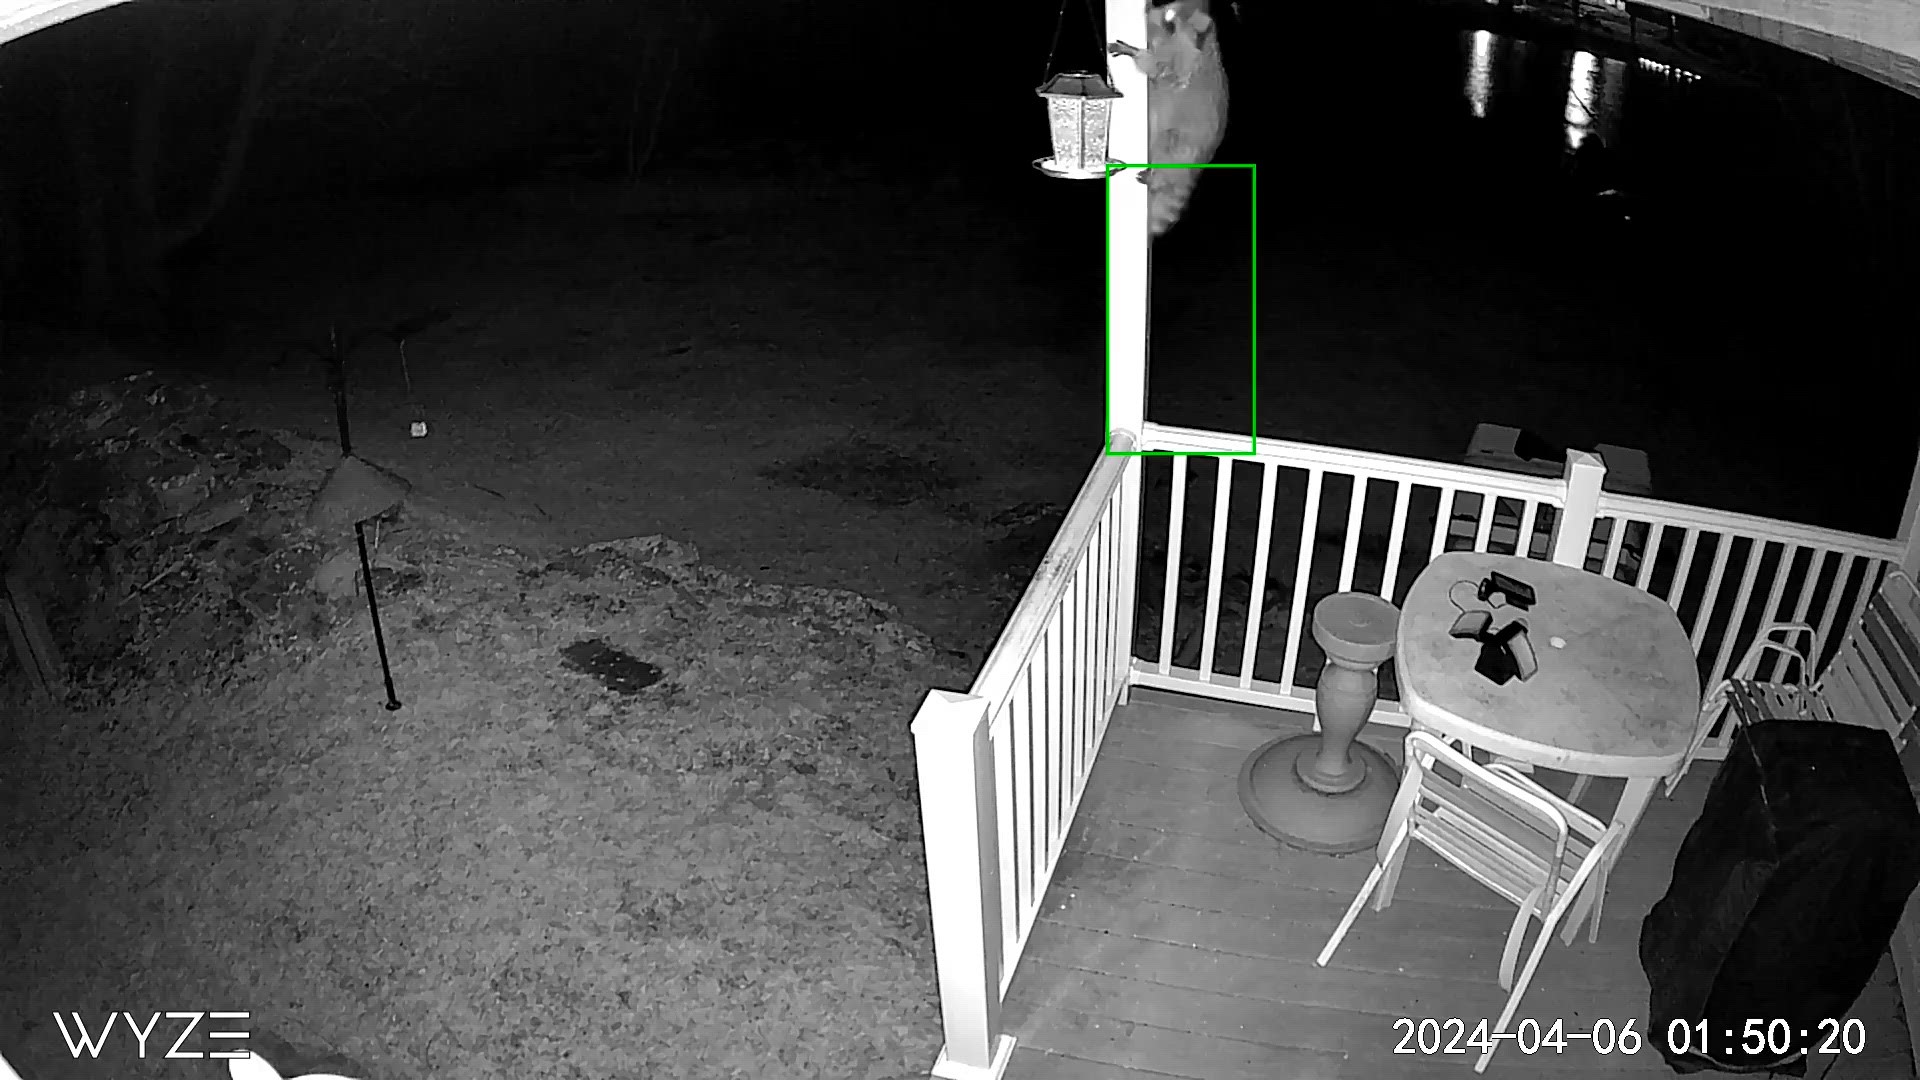 Credit: House cam 4:59 am this morning michael simmons